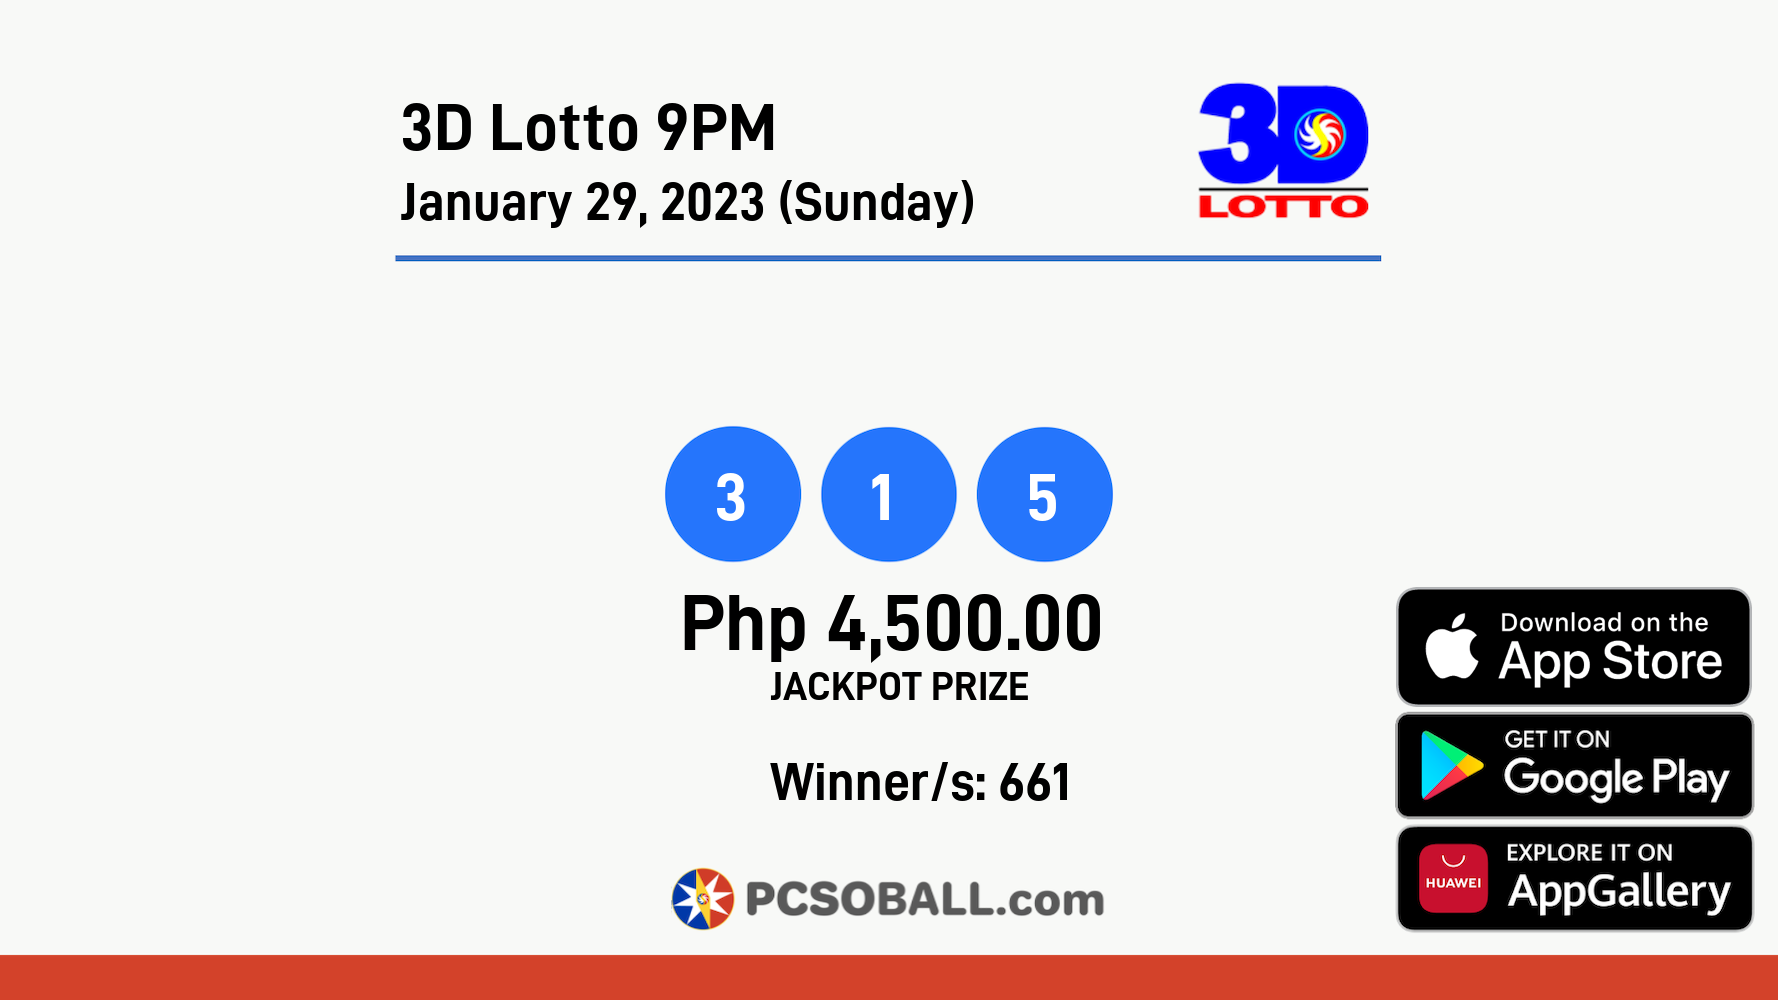 3D Lotto 9PM January 29, 2023 (Sunday) Result